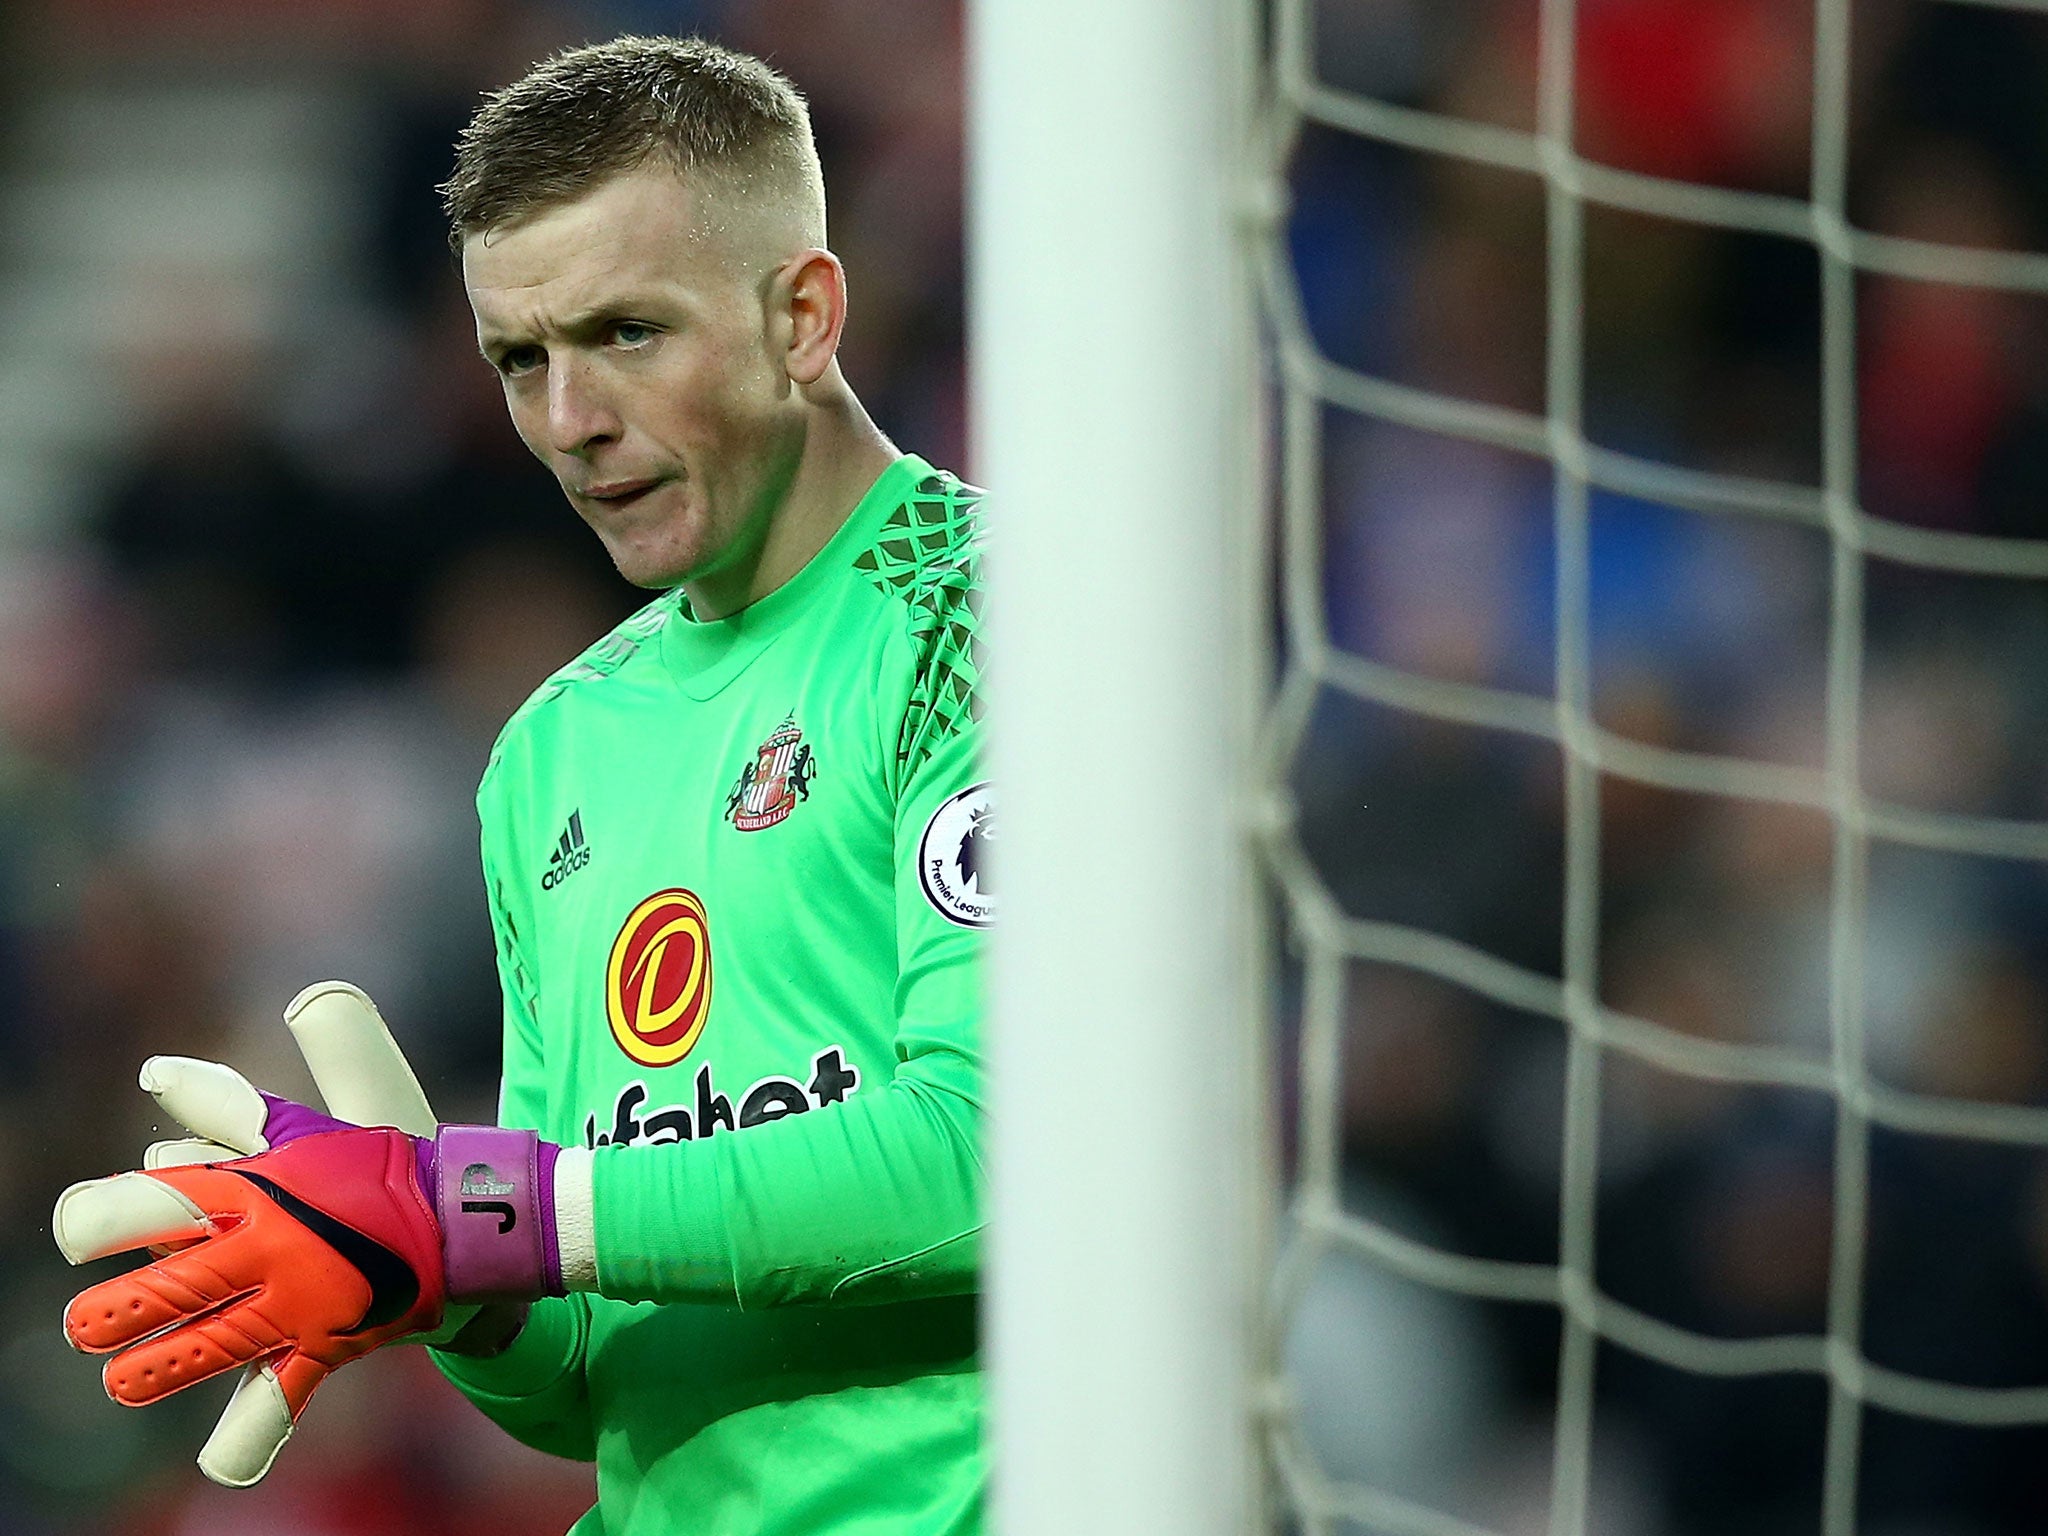 The loss of Jordan Pickford will come as a significant blow to Sunderland's relegation fight